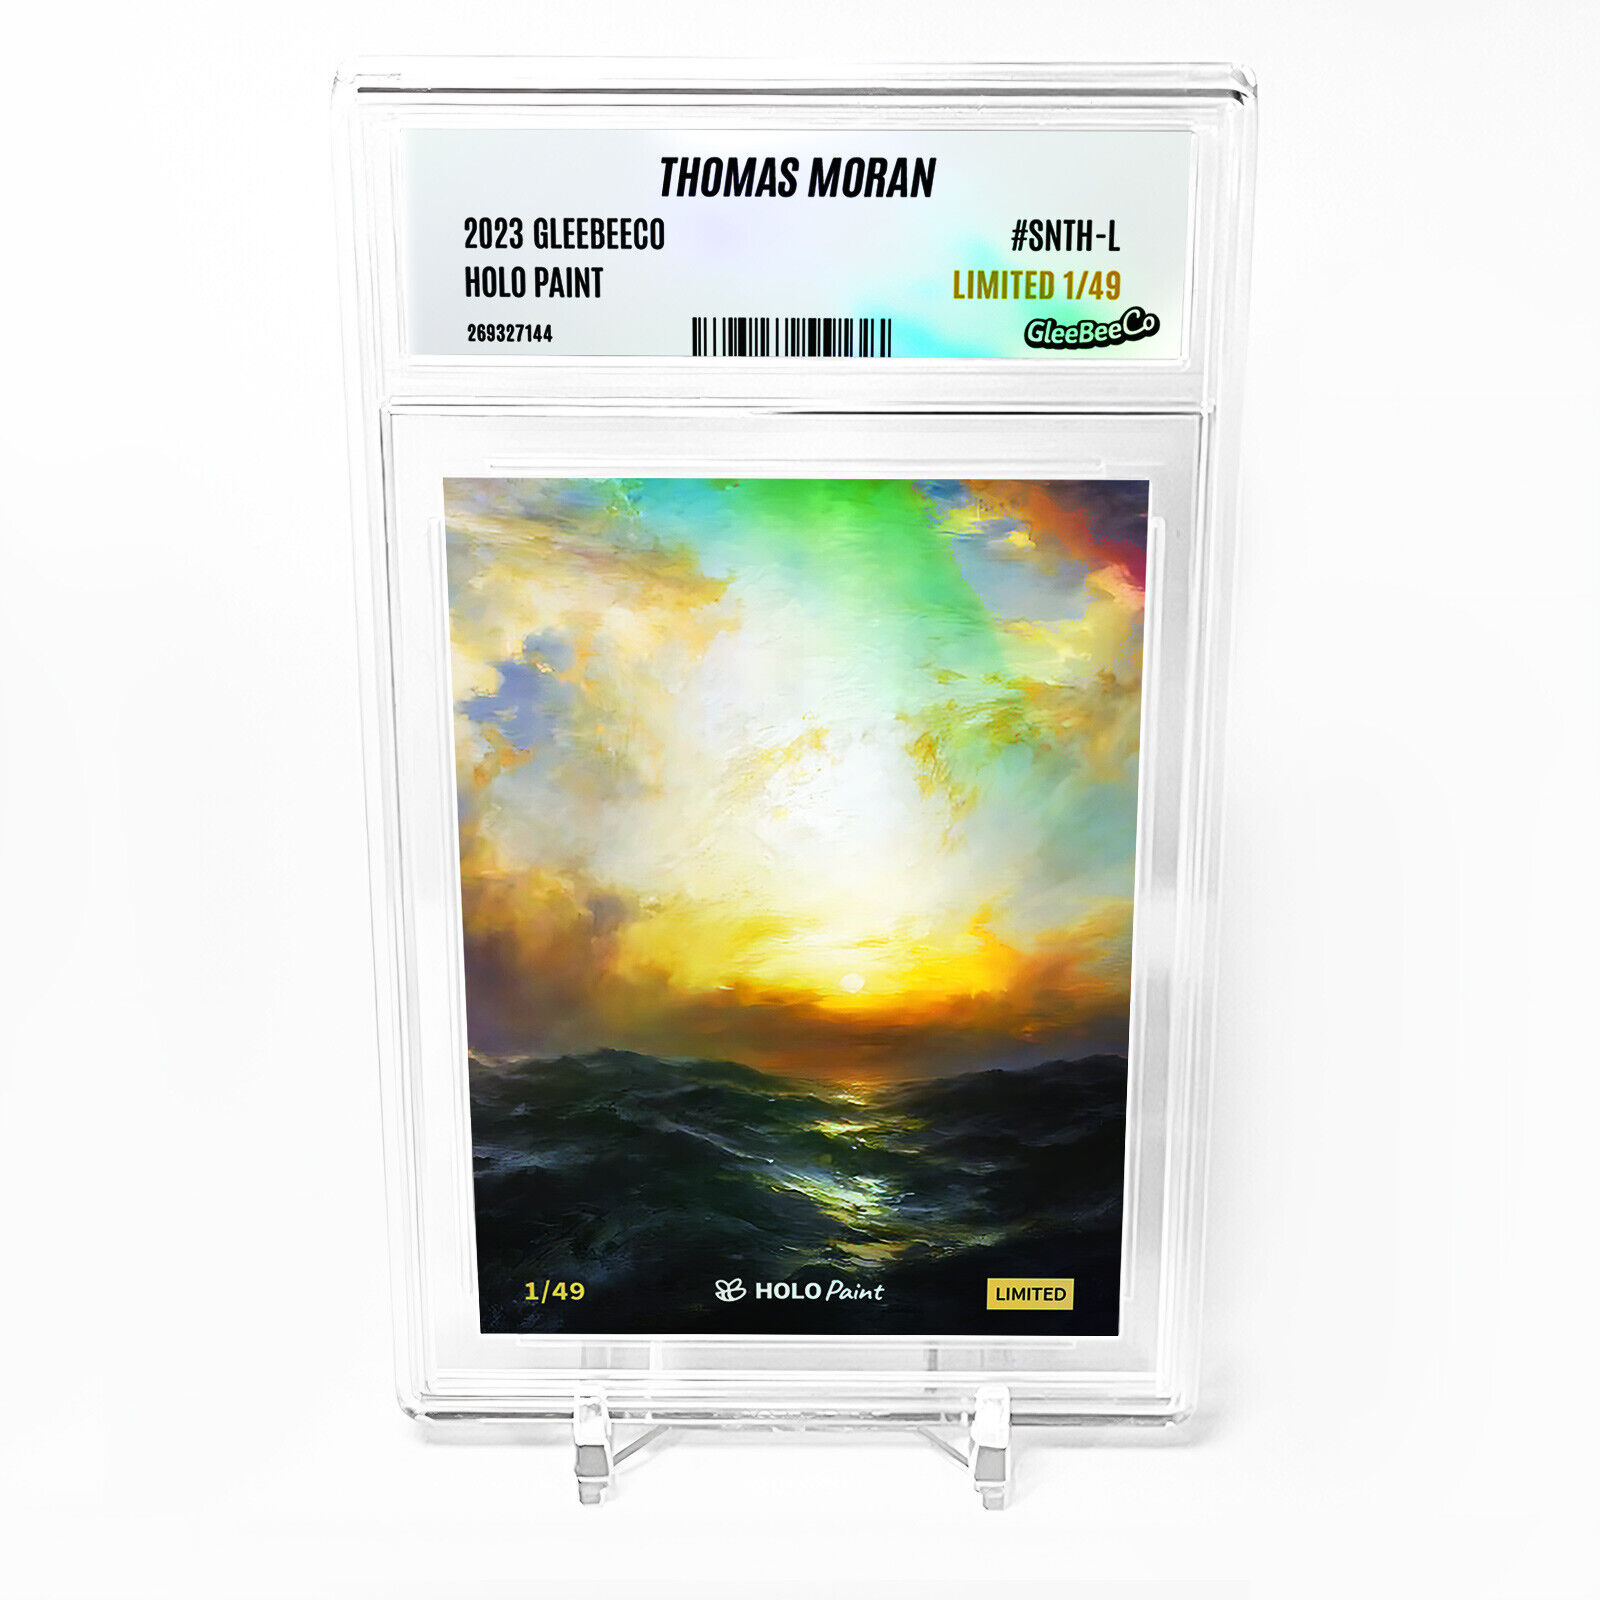 SUNSET AT SEA (Thomas Moran) Holographic Card GleeBeeCo #SNTH-L LIMITED to /49